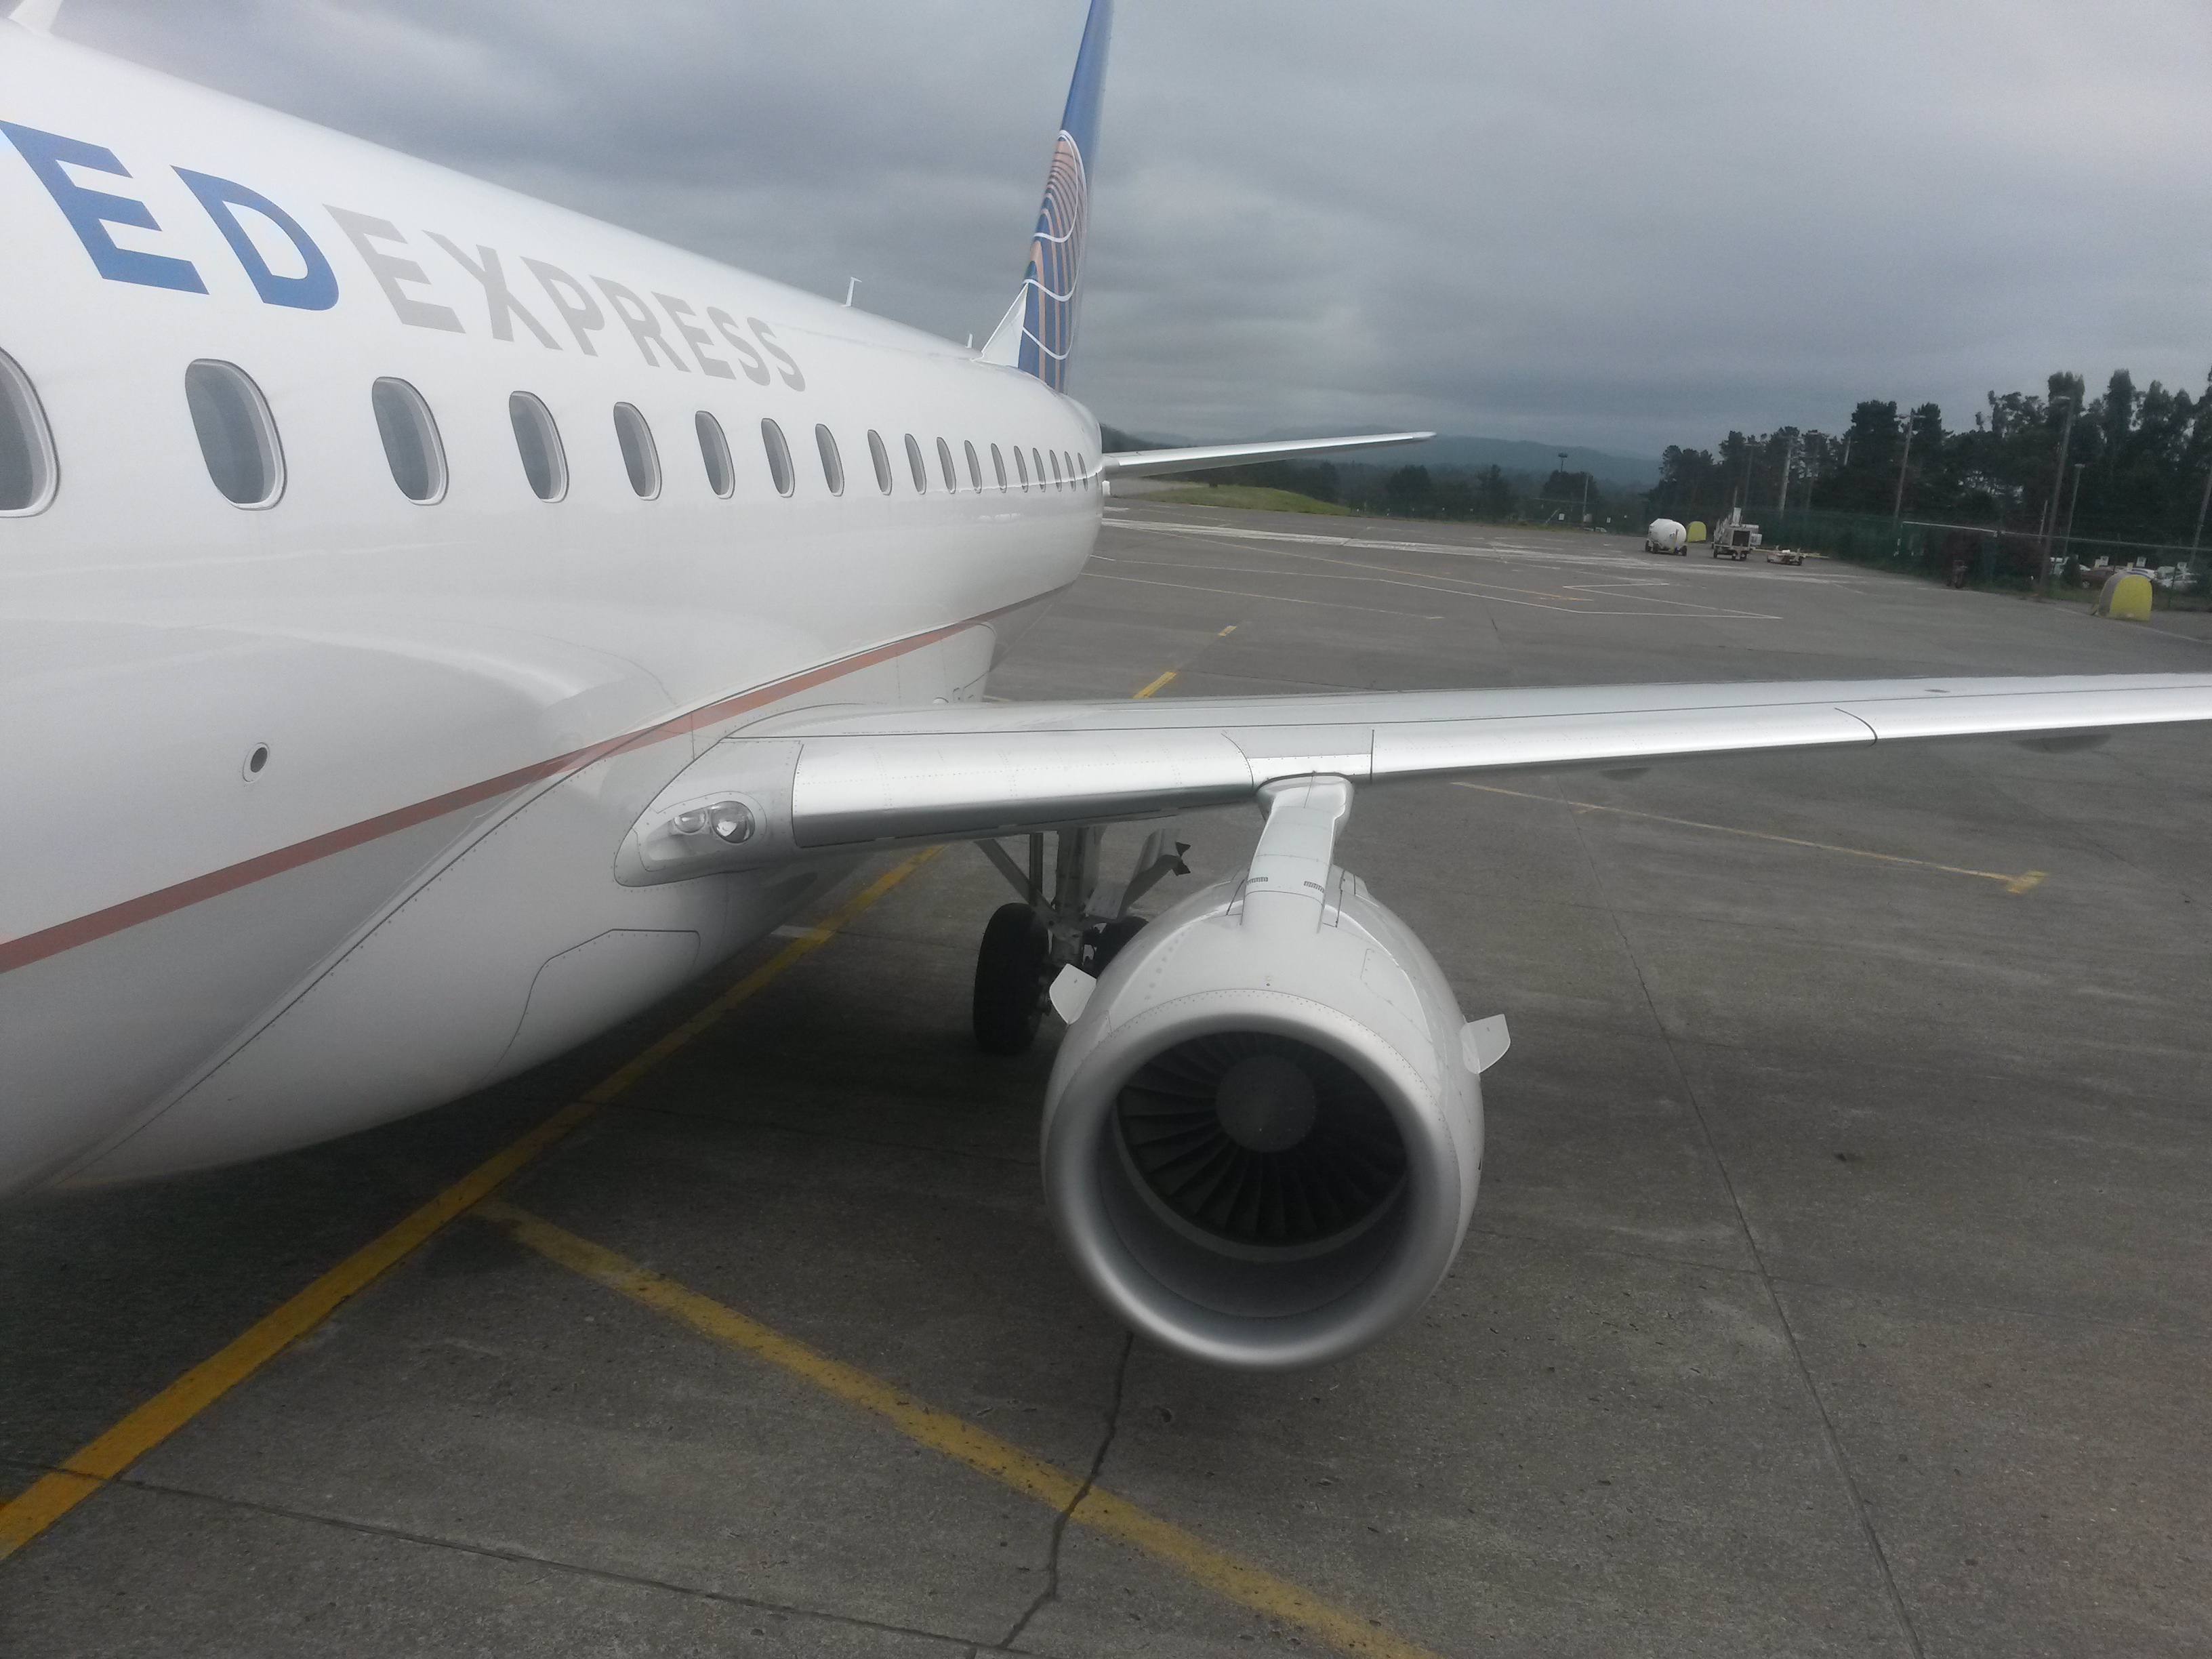 3 Reasons Why The Erj 175 Is My Favorite Non Wide Body Jet